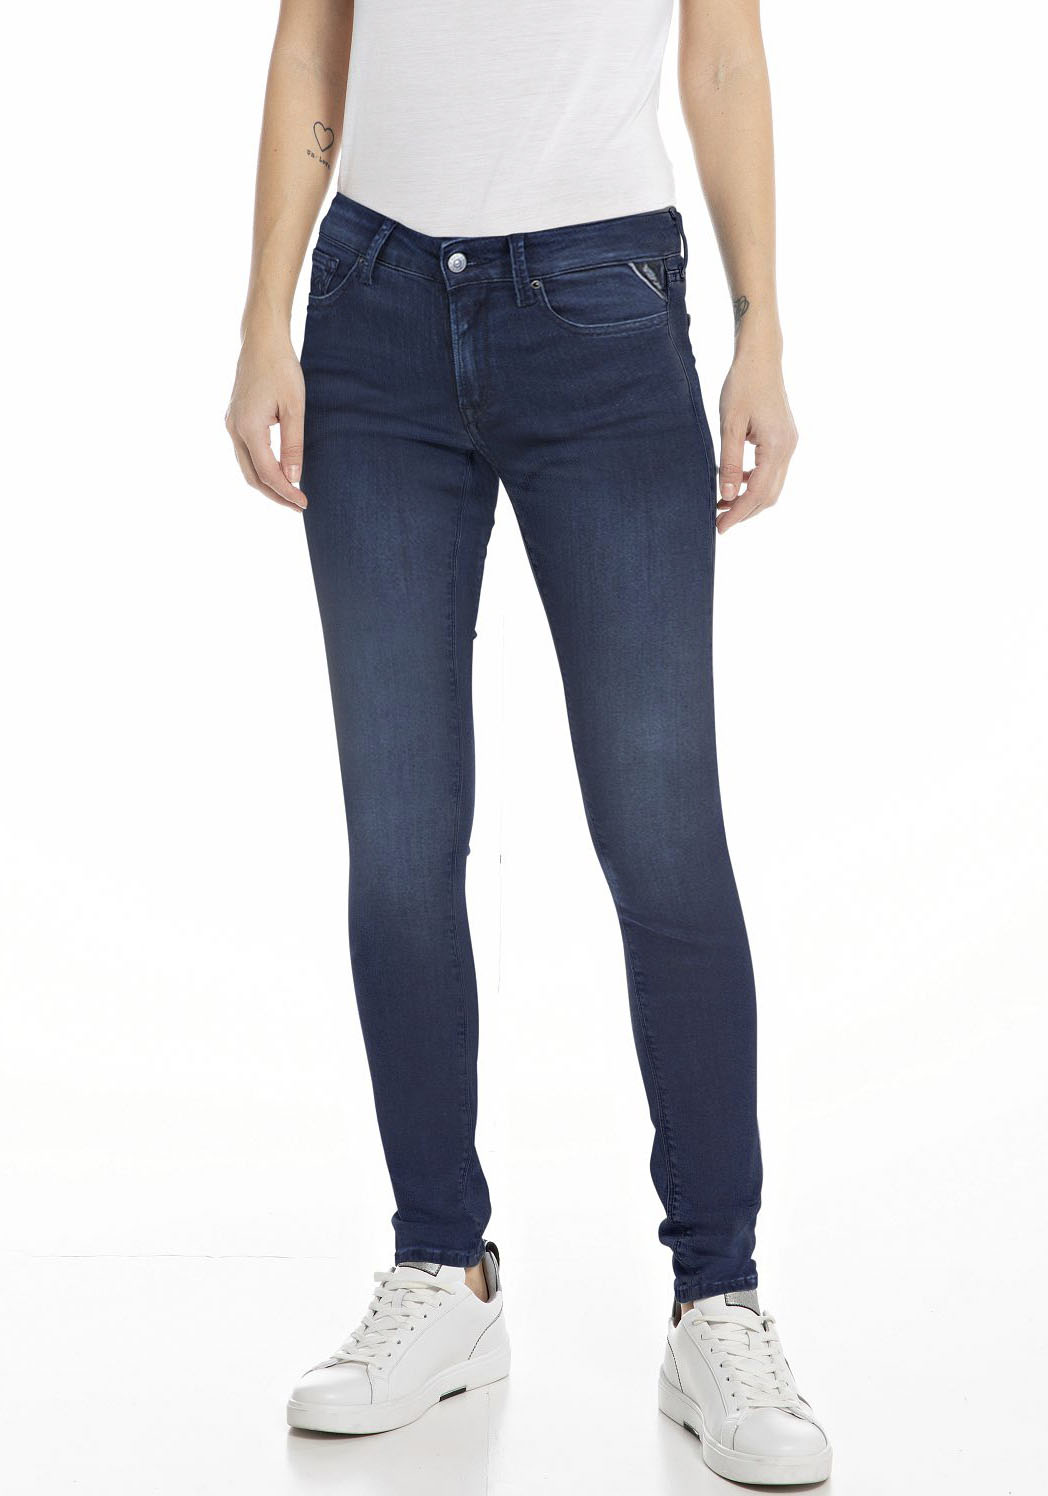 Replay 5-Pocket-Jeans »NEW LUZ«, in Ankle-Länge von Replay